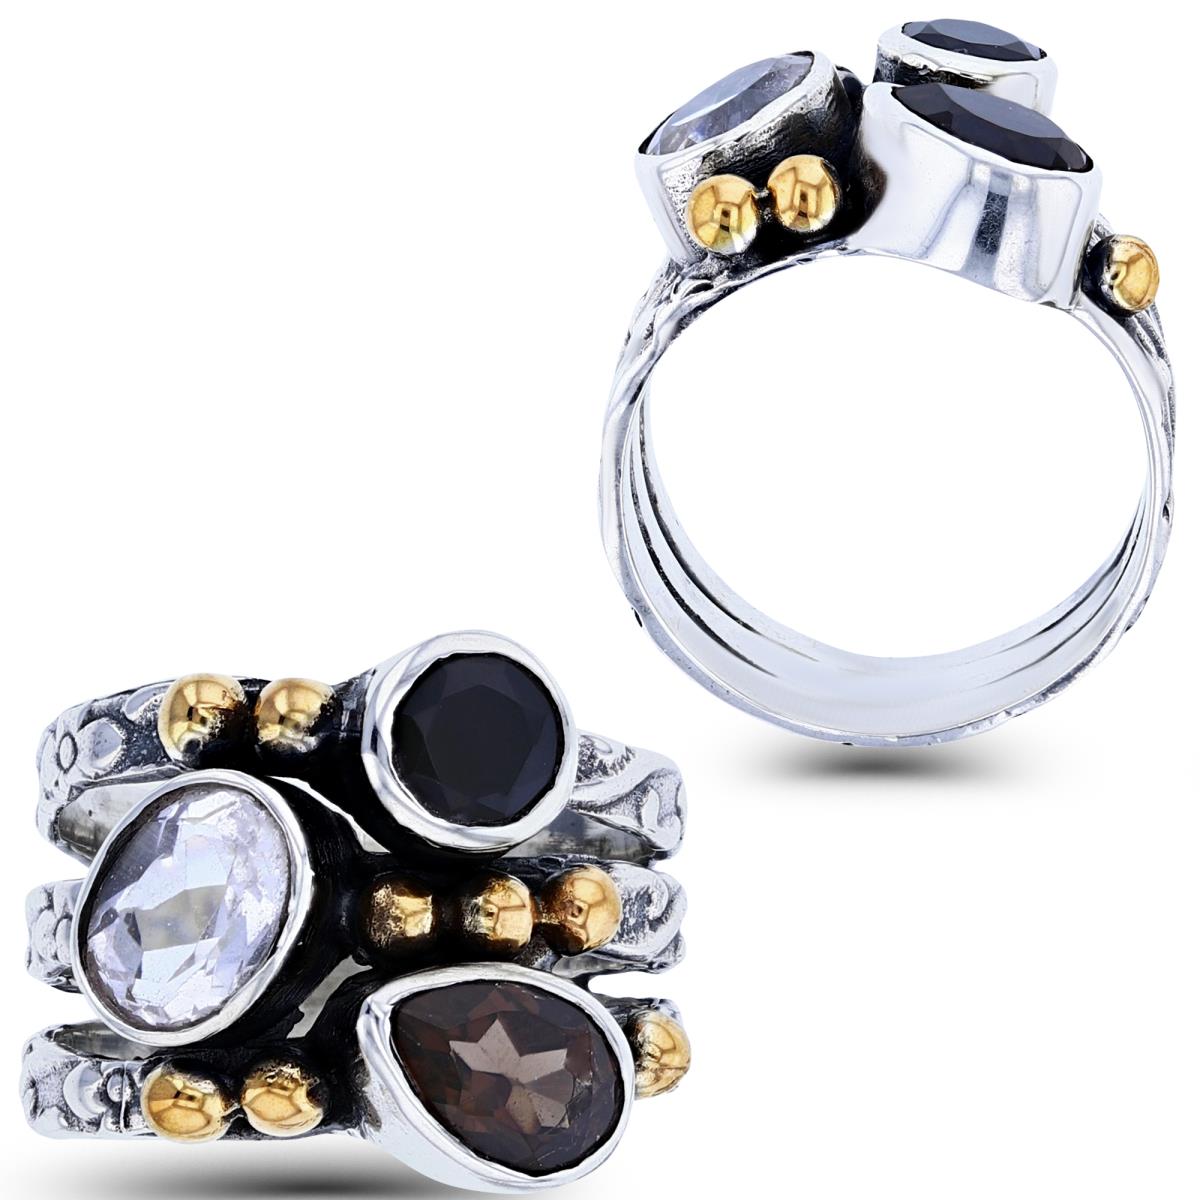 Sterling Silver Oxidized+Yellow Plated Beads Bezel 7x5mm PS Smokey/5mm Rnd Black Onyx & 7x5mm Ov CrystalTextured Wide Band